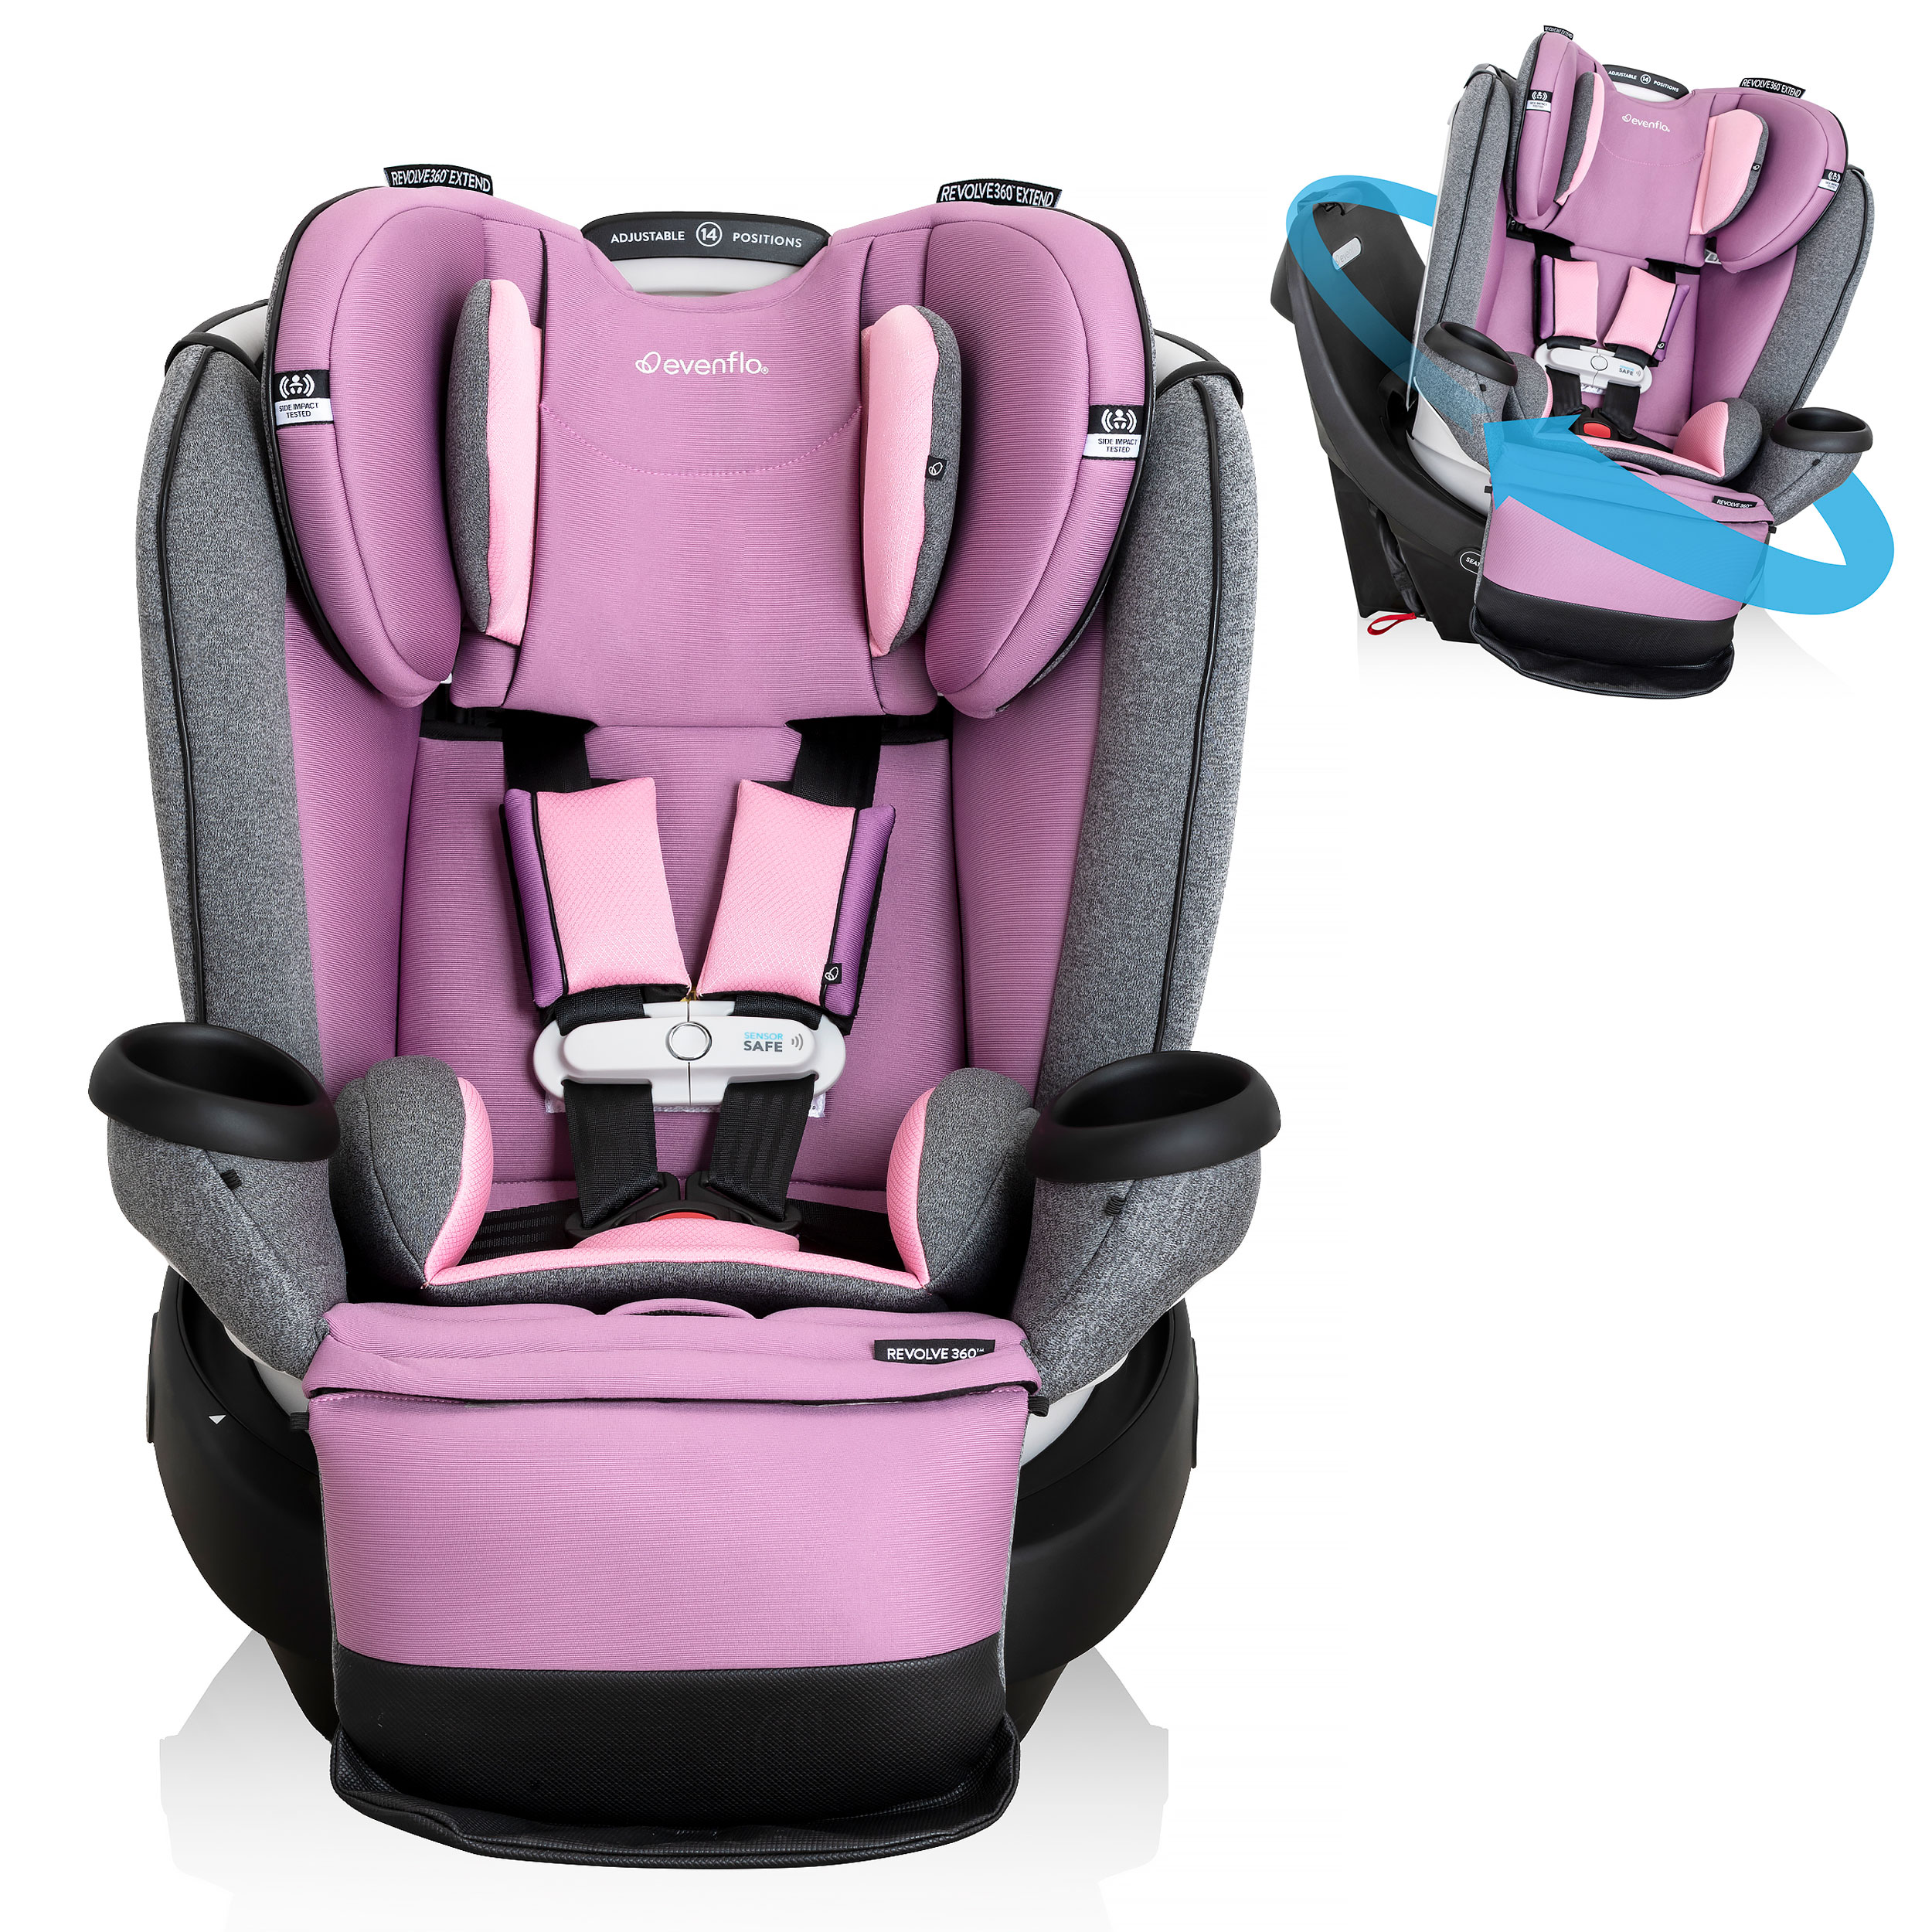 Gold Revolve360 Extend All-in-One Rotational Car Seat with SensorSafe (Opal Pink) - image 1 of 37